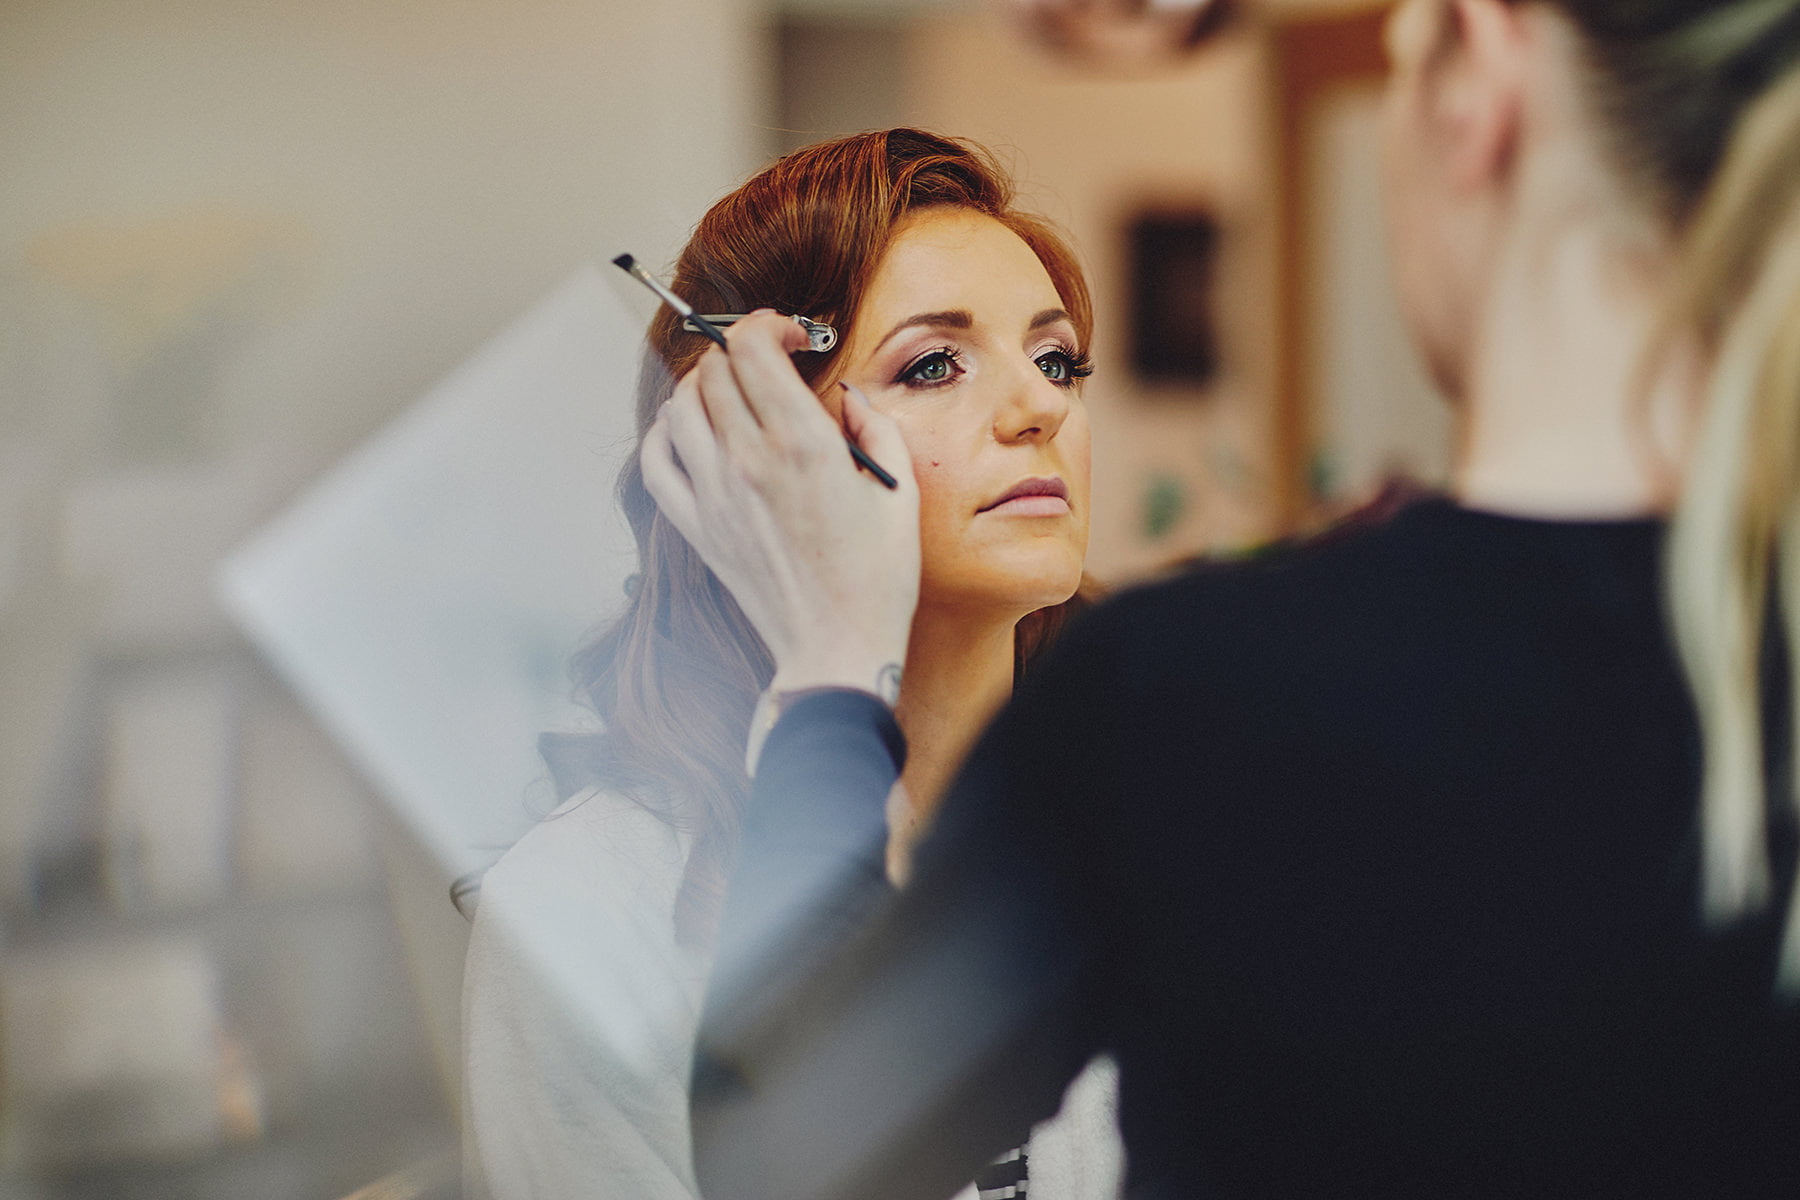 Schedule hair and makeup on the morning of your wedding 23